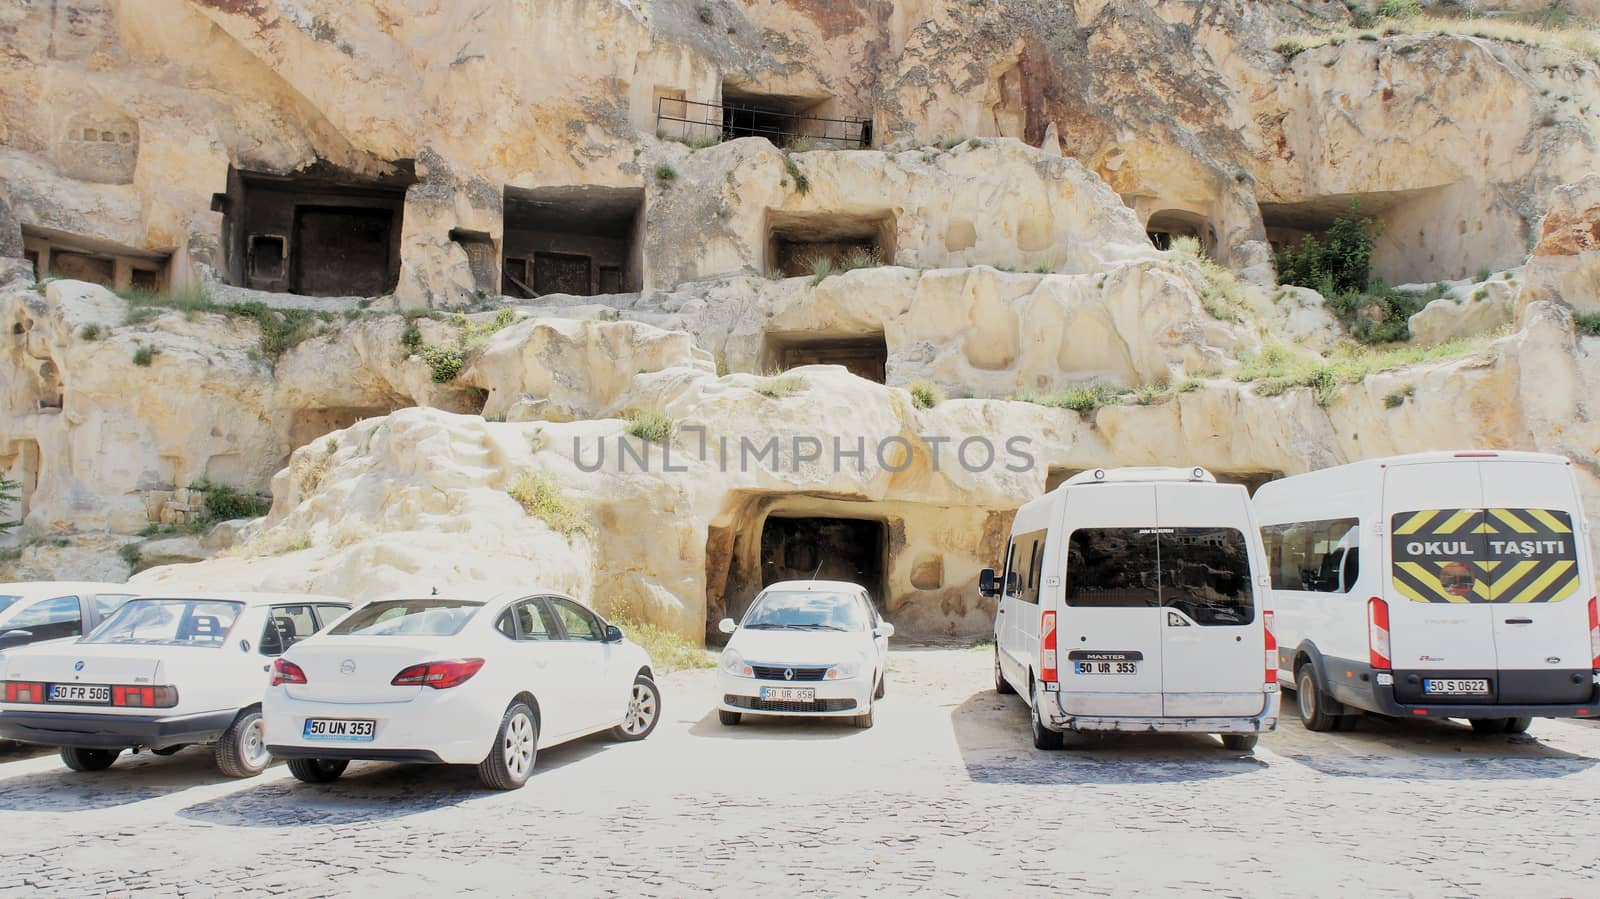 Uegruep, Anatolia, Turkey, July 2nd 2015: Parking in Cappadocia with old former rock flats in the background